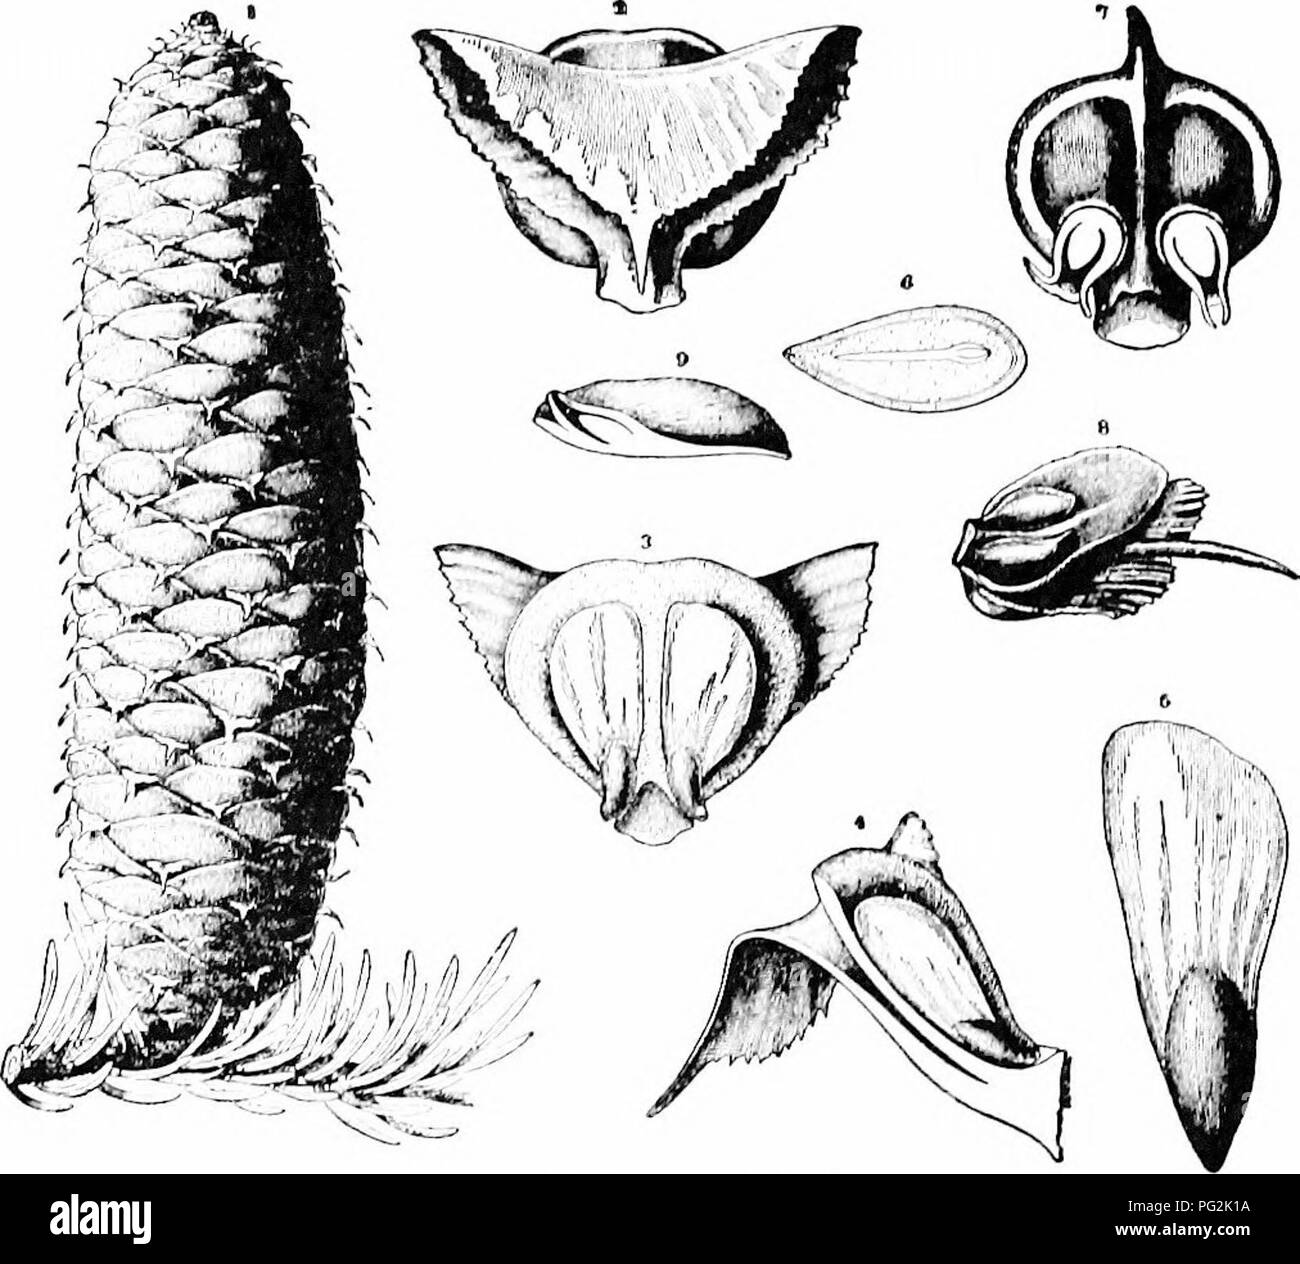 . Morphology of gymnosperms. Gymnosperms; Plant morphology. 246 MORPHOLOGY OF GYMNOSPERMS fused by their adaxial (posterior) margins. His illustrative material consisted of a cone of Larix, in which the ovuliferous scale was replaced by a short branch bearing two leaves transversely placed (that is, their margins adaxial and abaxial with reference to the main axis), the bract developing as a foliage leaf. This view was accepted later by Caspaey, Parlatore, Oersted, Von Mohl, Stenzel, Englemann, Willkomm, and Celakovsky.. Fig. 271.—Ovulate structures of various Abietineae: i, Abies peclinala, o Stock Photo